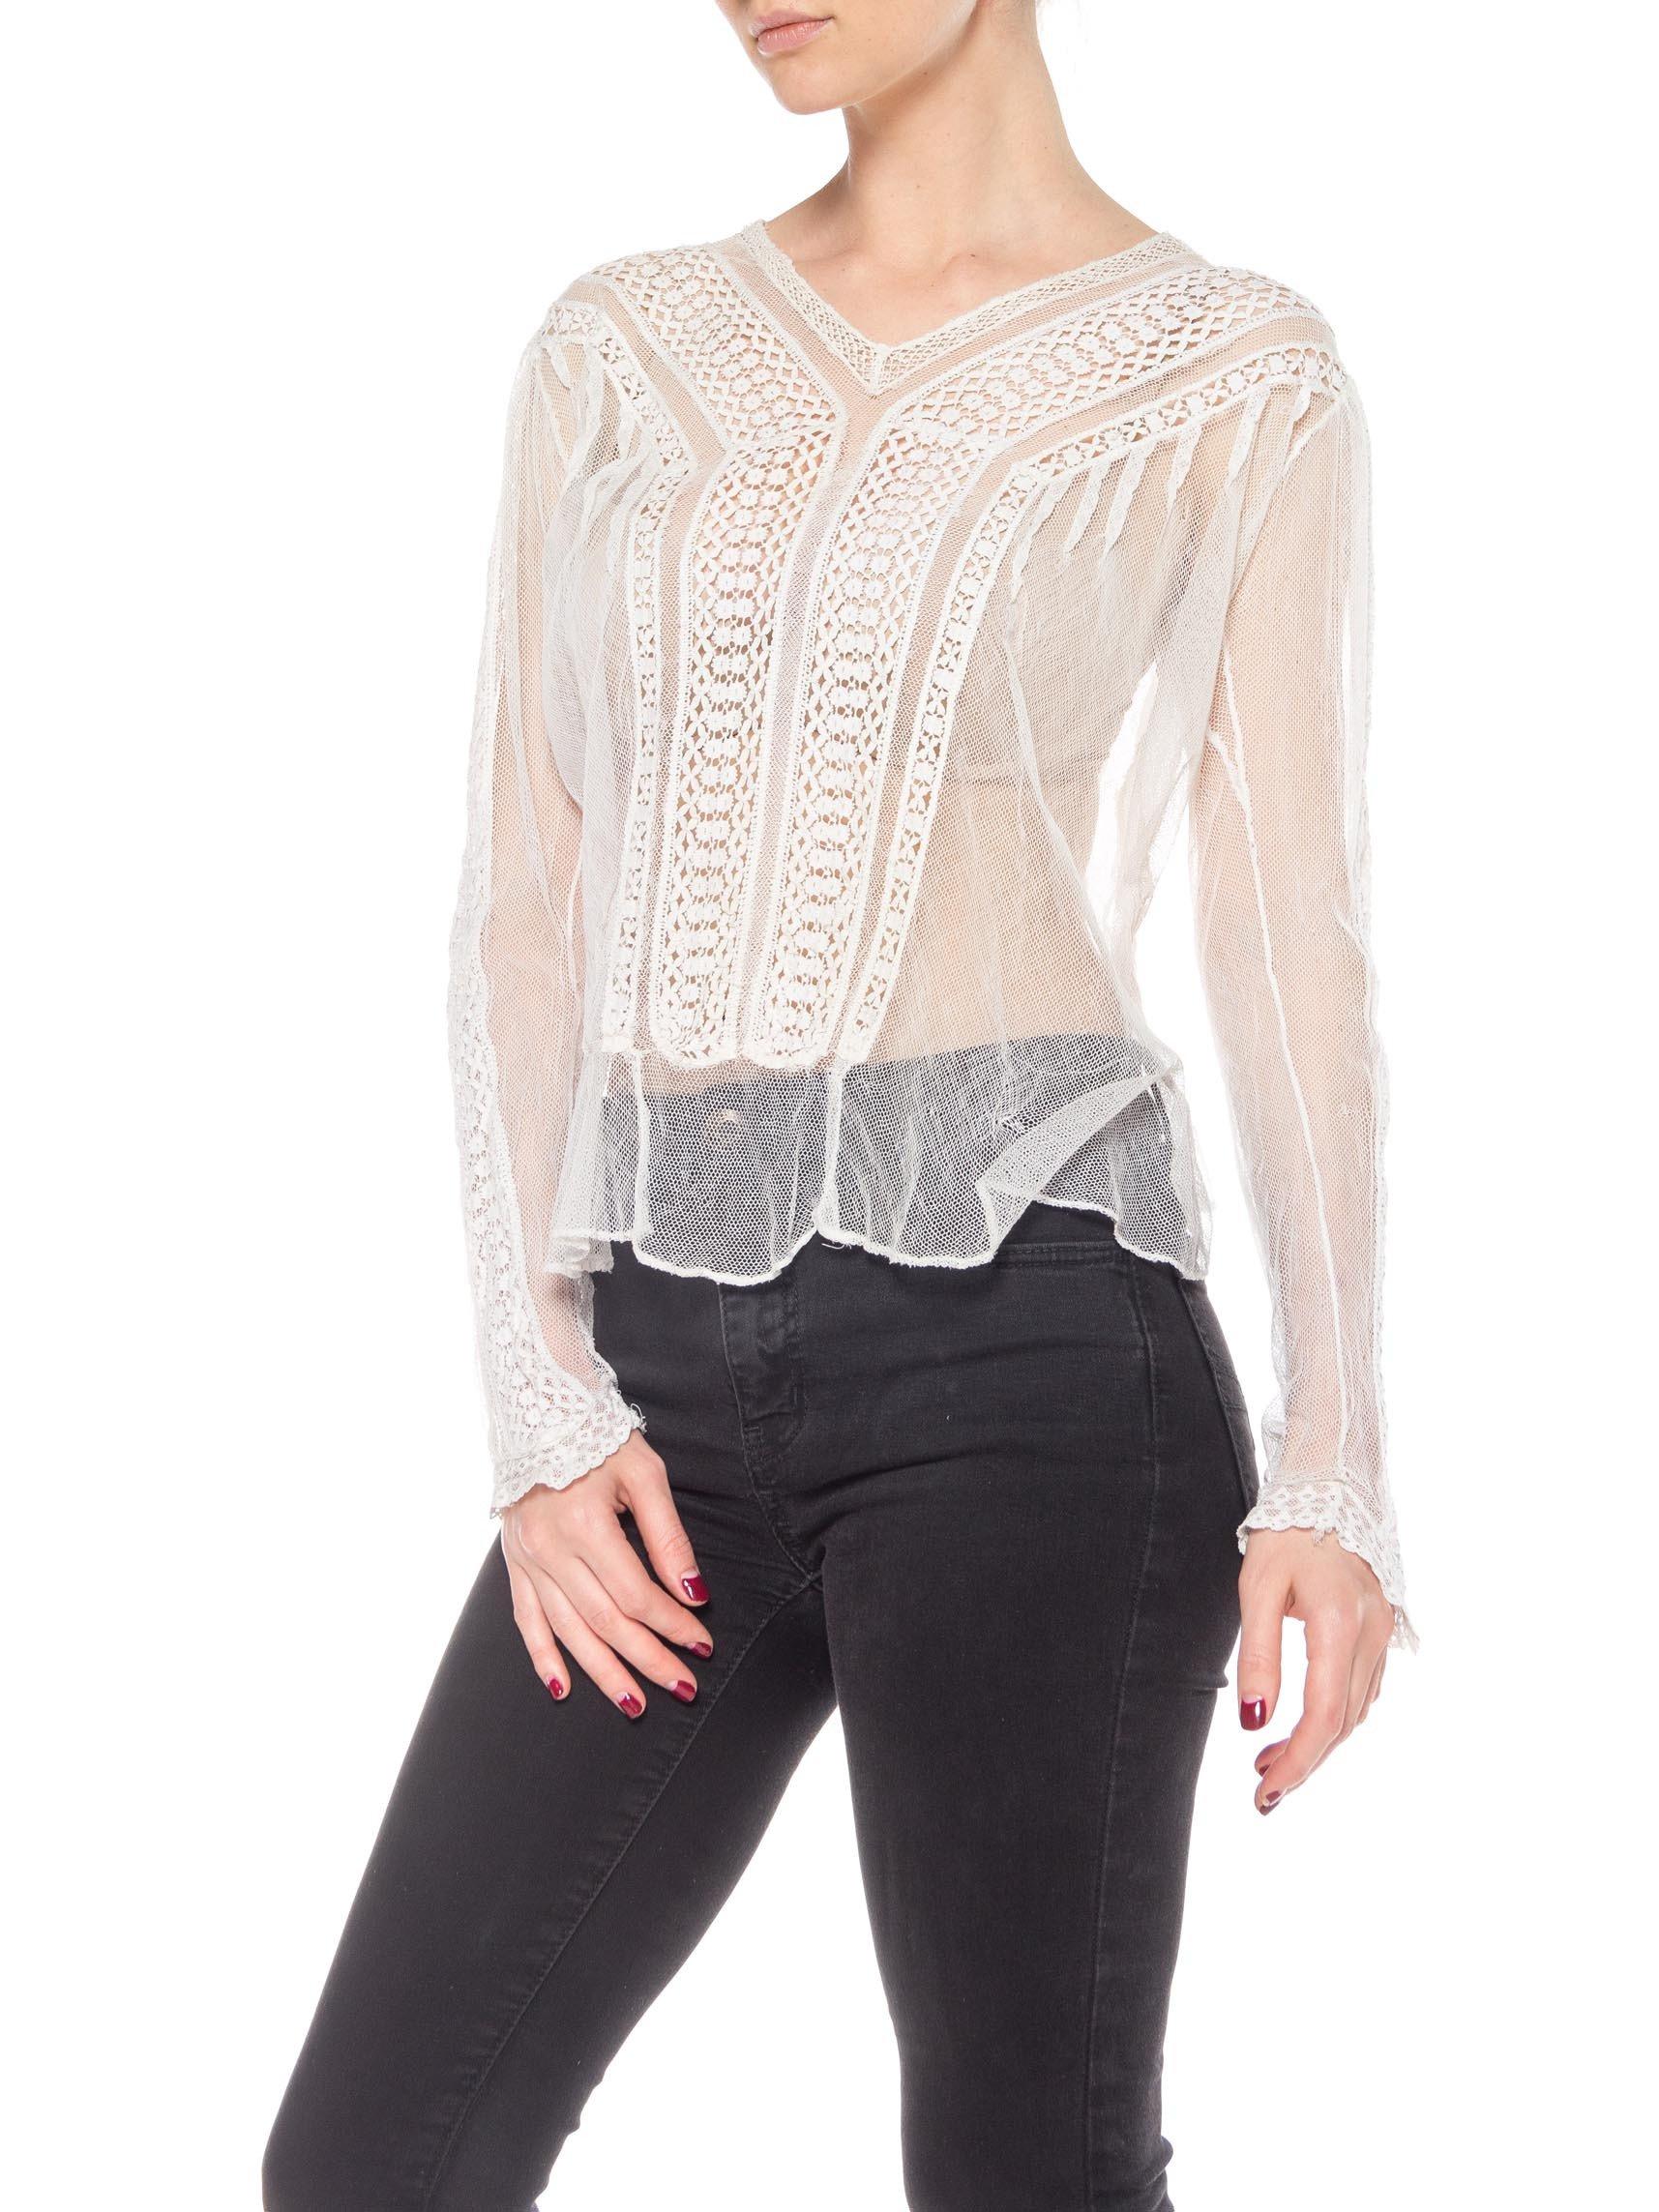 1900S White Sheer Cotton Net Blouse With Cluny Style Lace Insertion In The Bodi In Excellent Condition In New York, NY